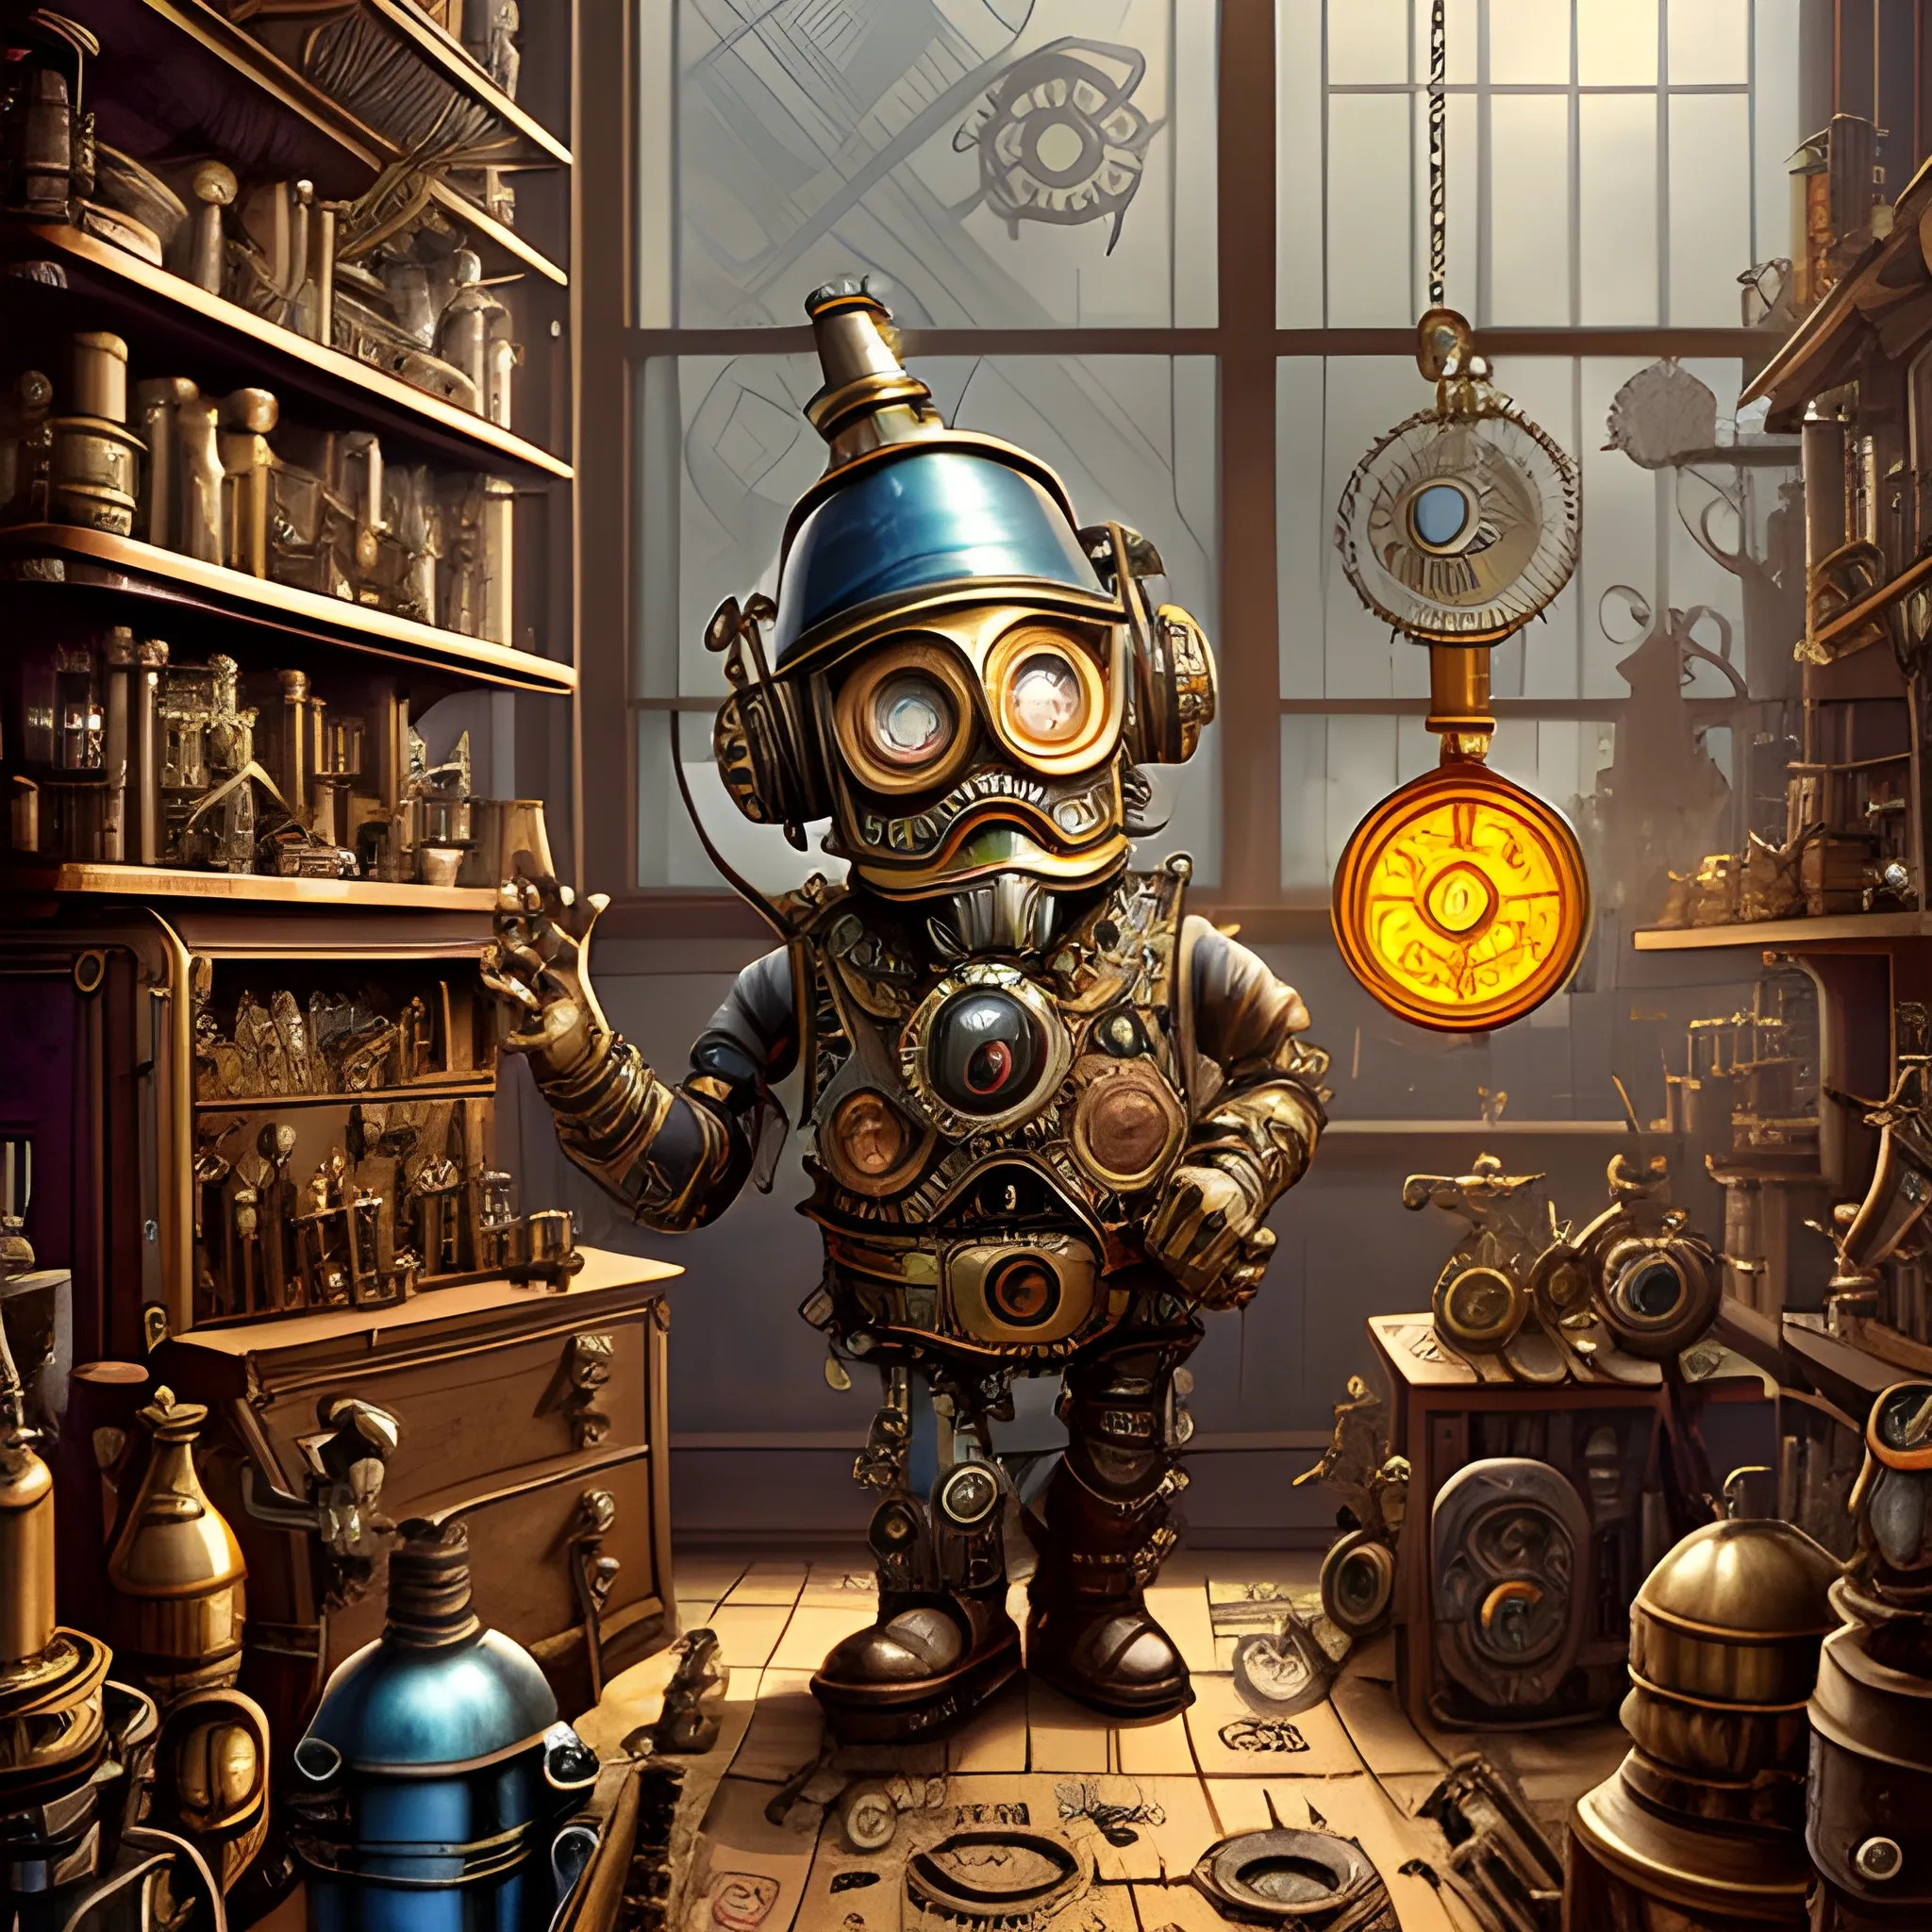 
A steampunk-inspired digital illustration of a robotinventor in a cluttered workshop, surrounded by intricate machinery and gears. The camera angle is a medium shot, capturing the gnome's enthusiastic expression as he tinkers with a fantastical contraption. The lighting is warm and atmospheric, with rays of sunlight streaming through stained glass windows, casting vibrant colors and ((shadows)) across the room. The style combines elements of steampunk and clock-punk, resembling the works of Jules Verne and H.R. Giger. The image is detailed and intricate, showcasing the gnome's ingenious inventions and the mesmerizing complexity of the steampunk world.